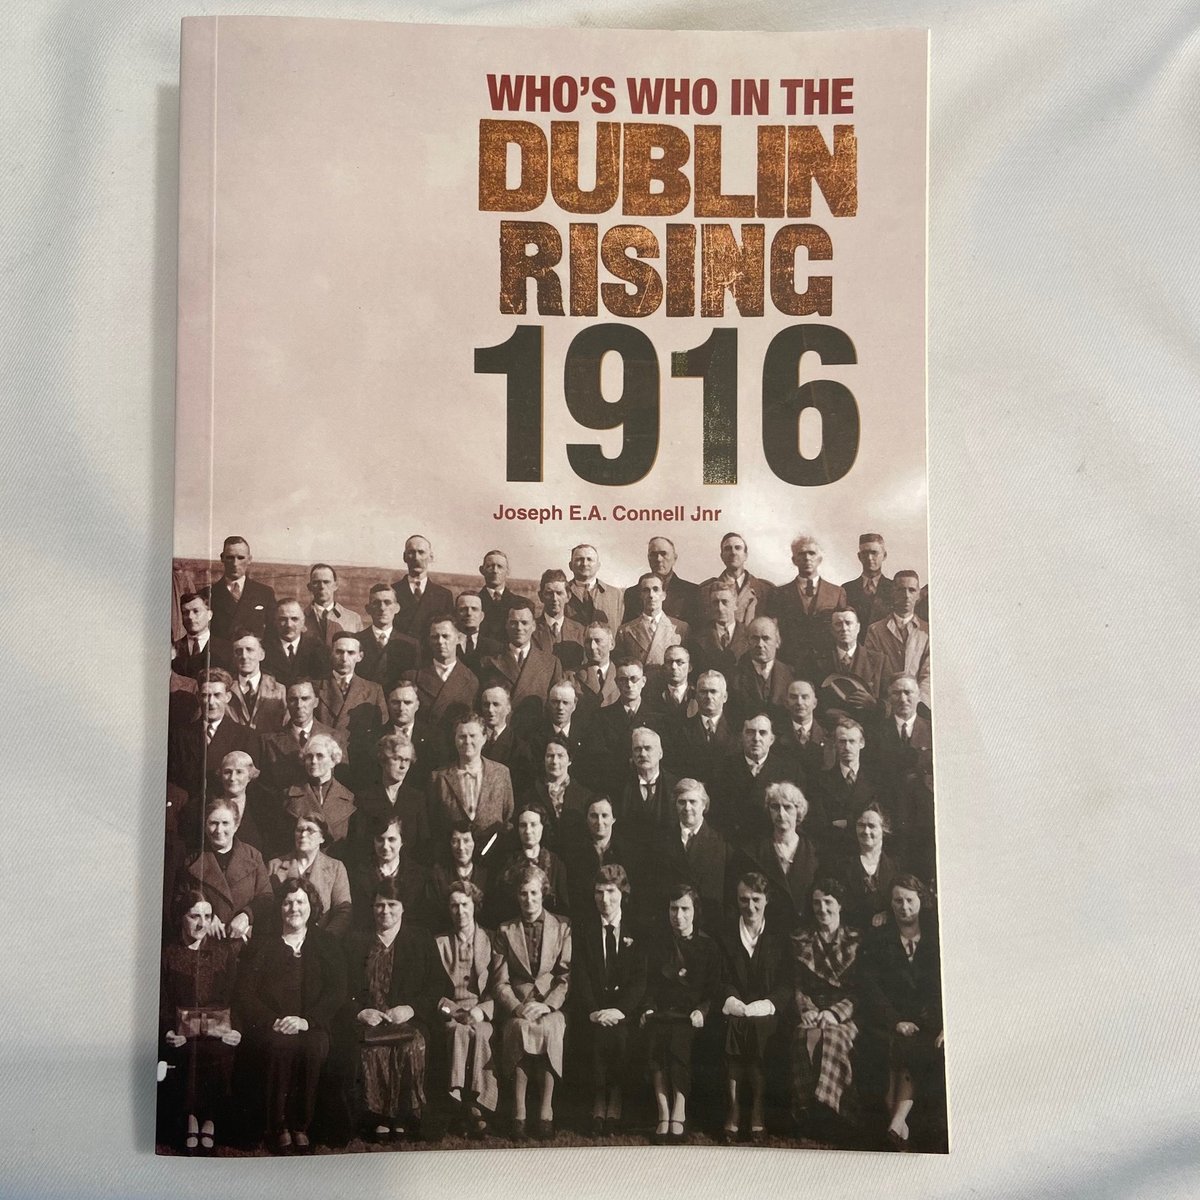 Image of Who’s Who in the Dublin Rising 1916